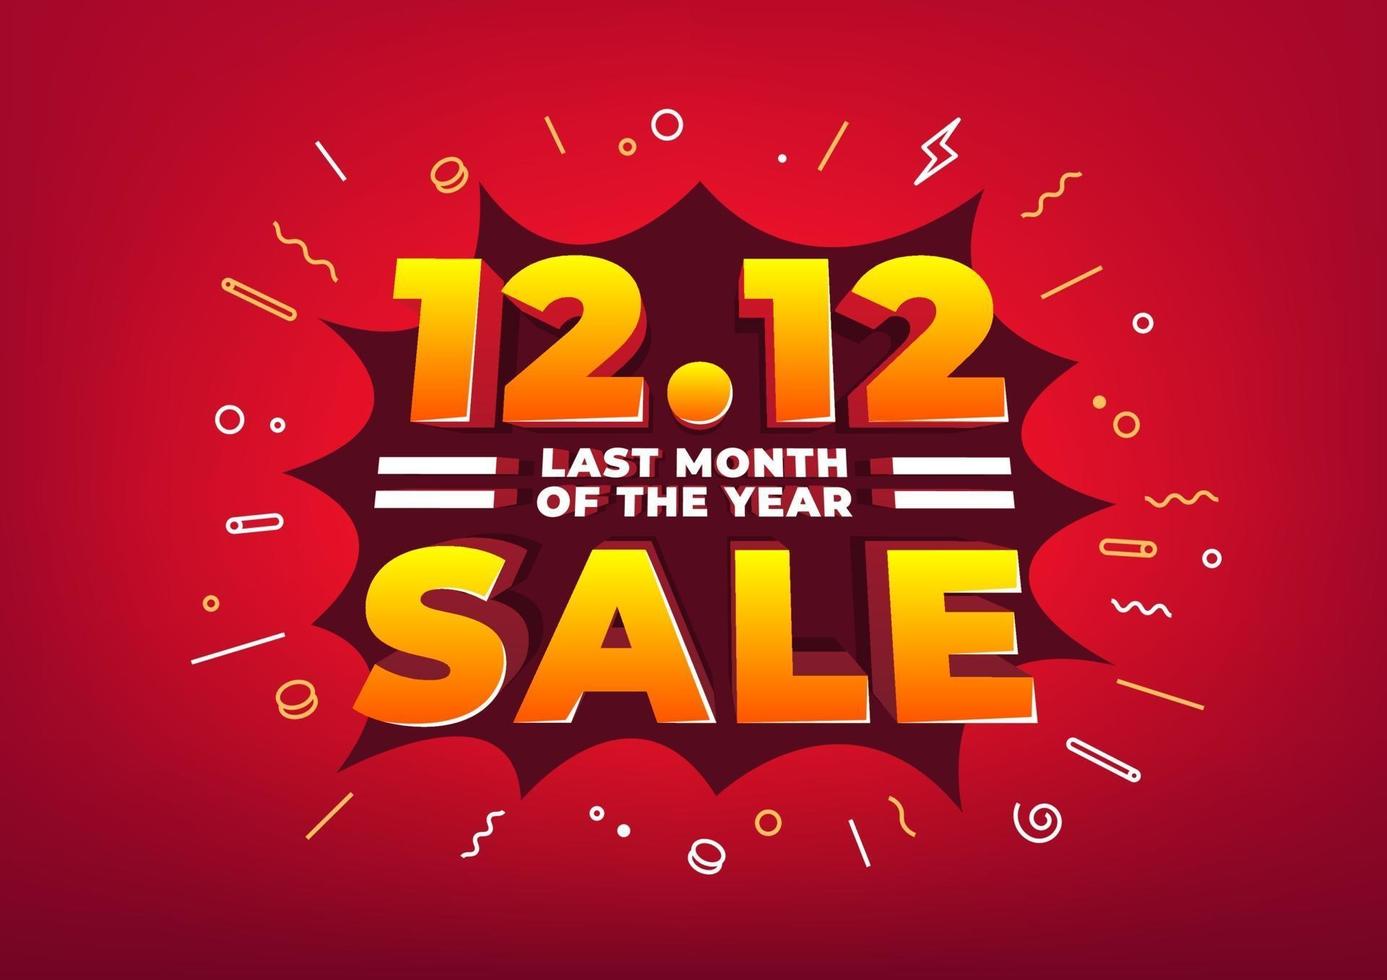 The 12.12 sale offers consumers options for shopping online or in-store.